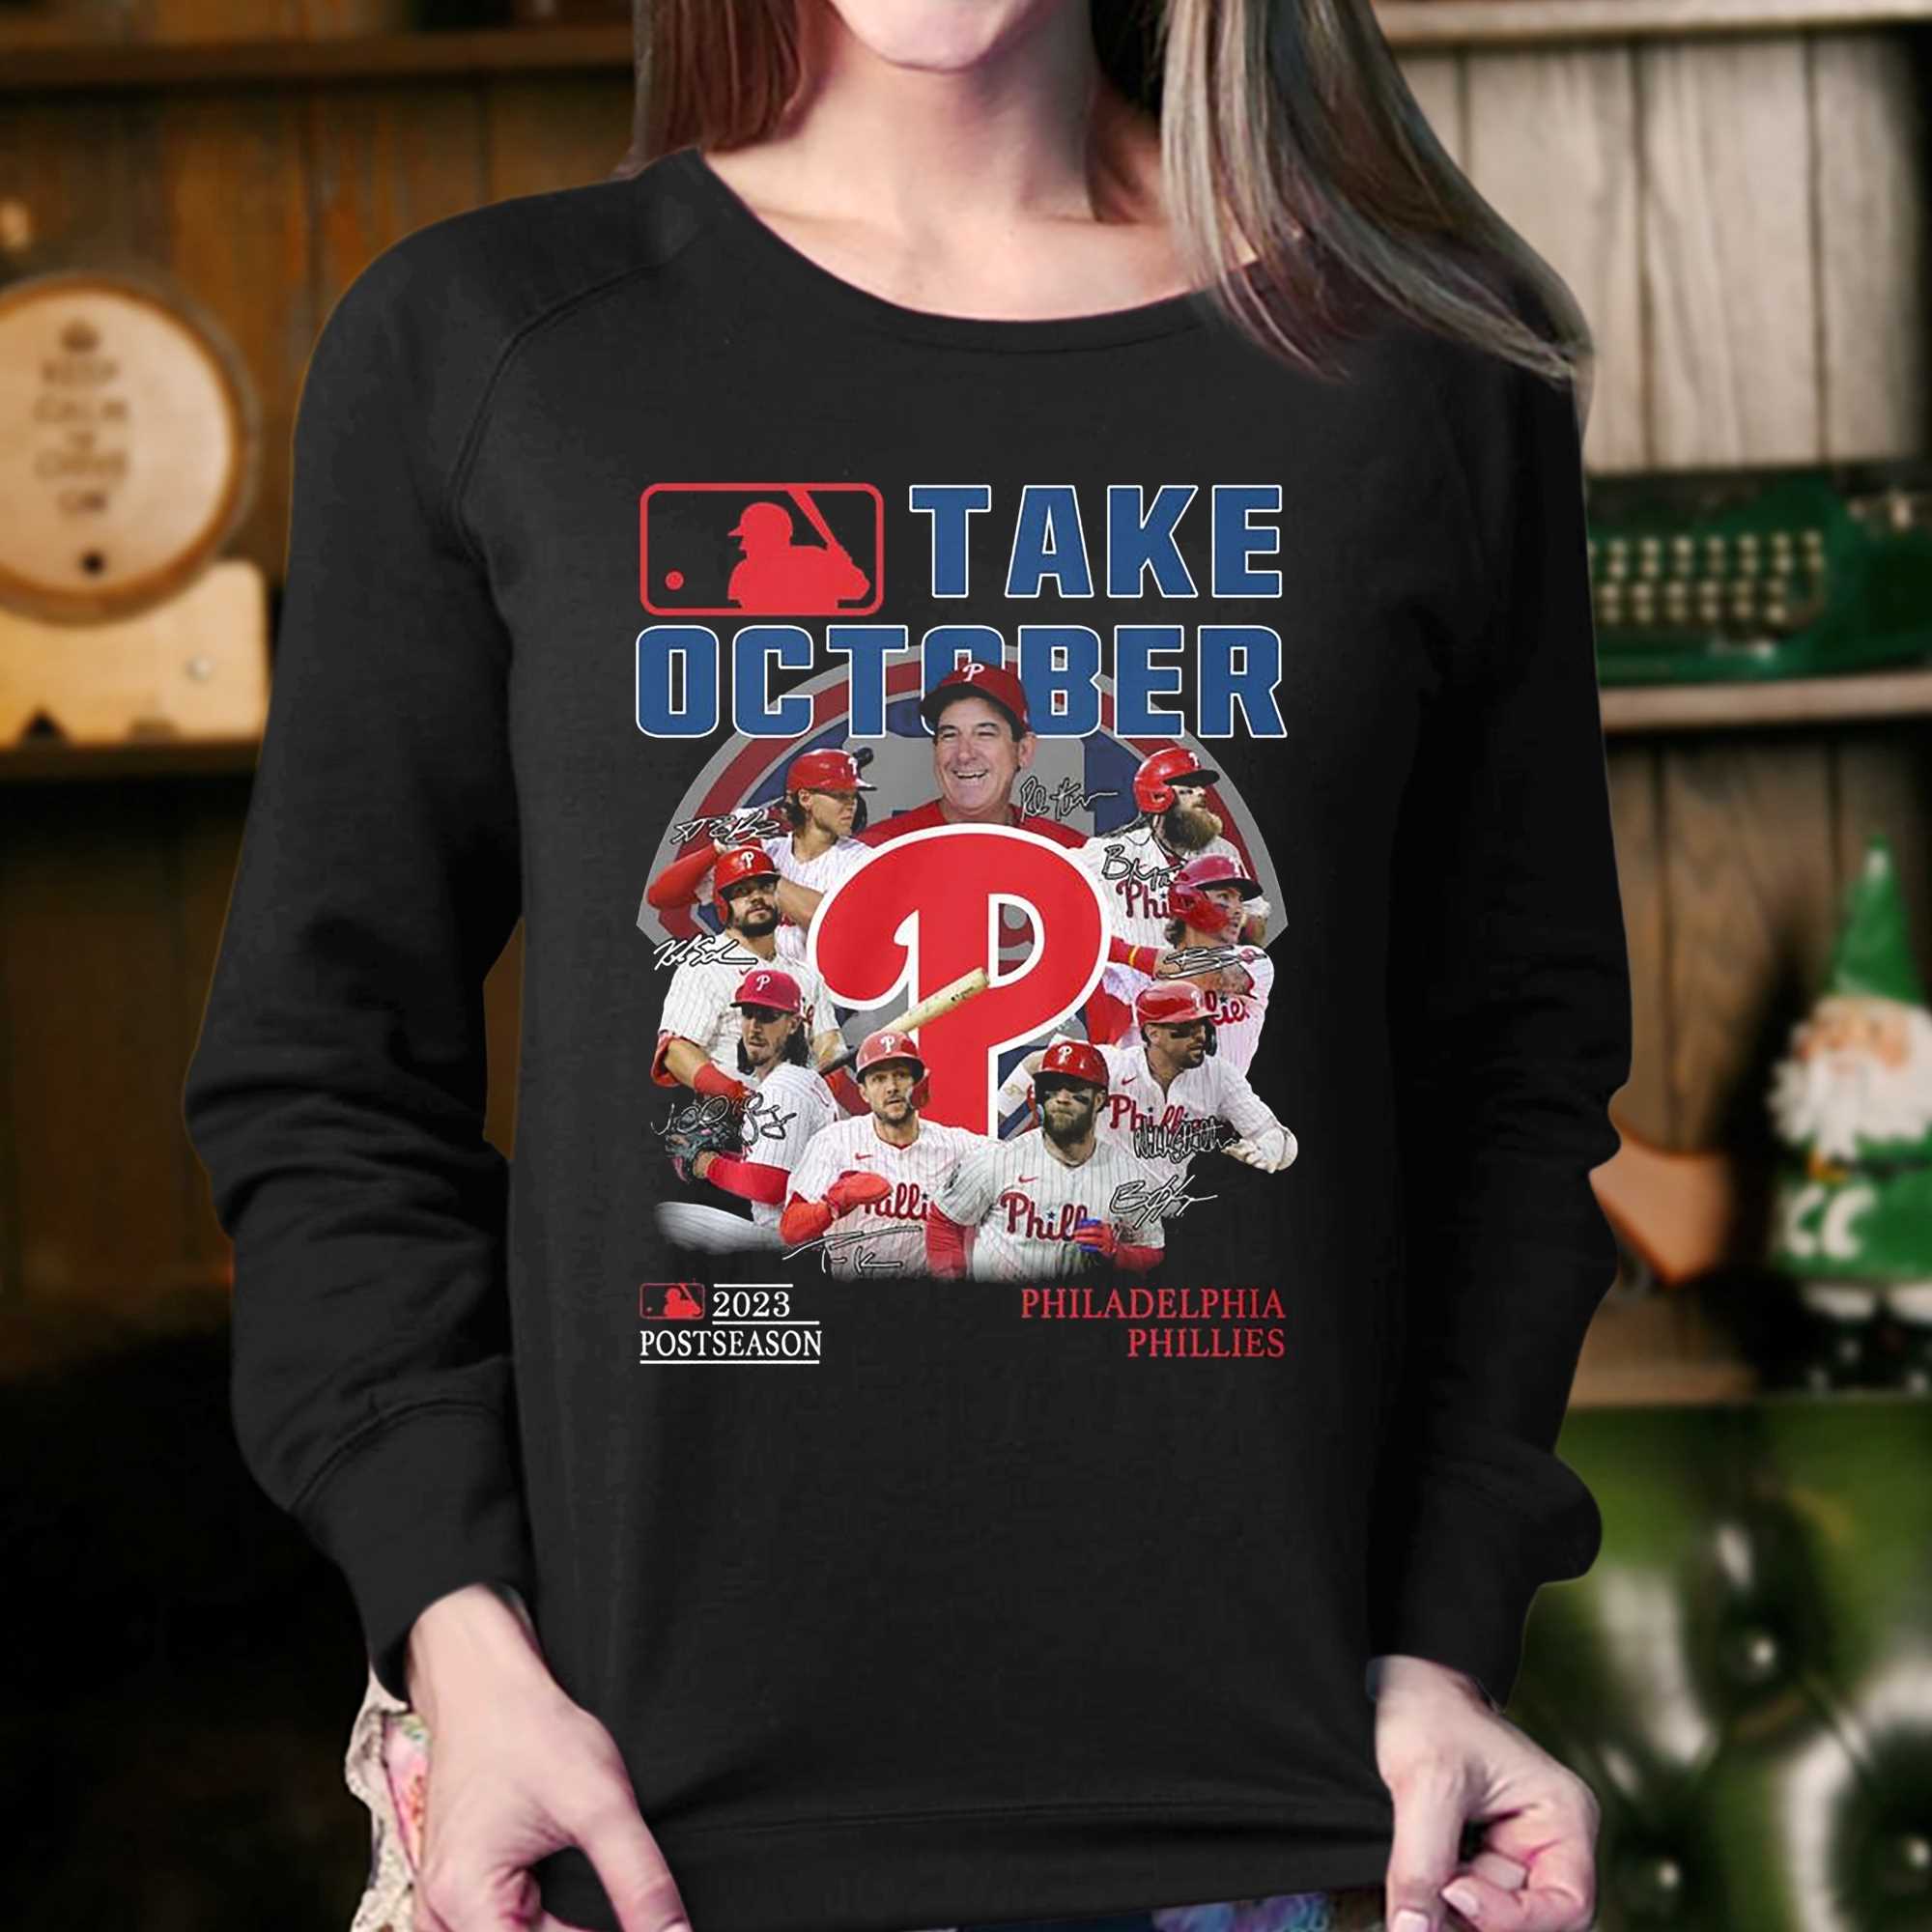 Phillies playoff merchandise available now 